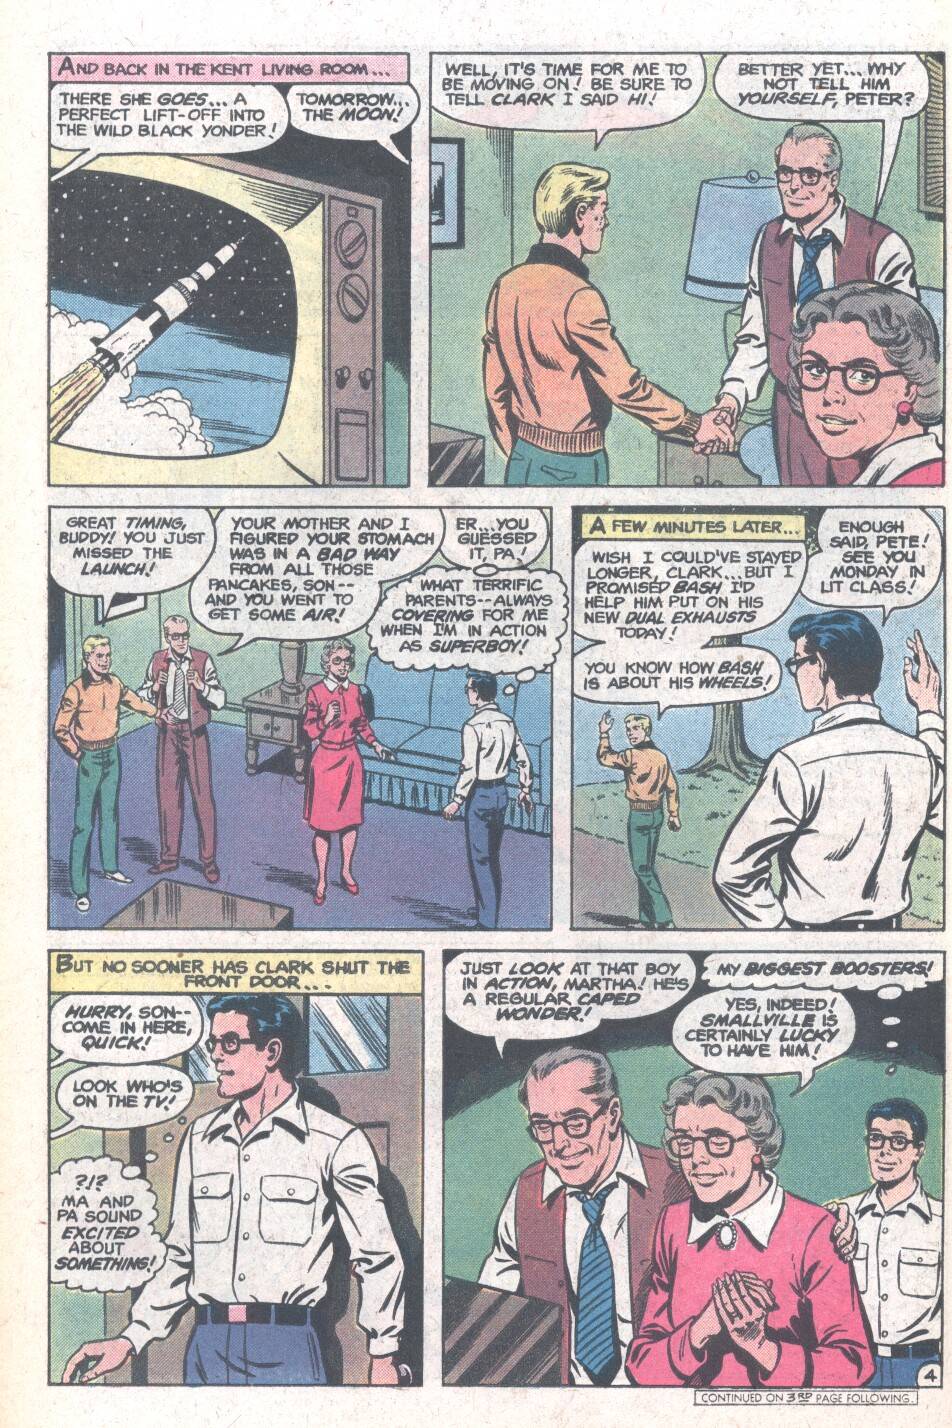 The New Adventures of Superboy 8 Page 4